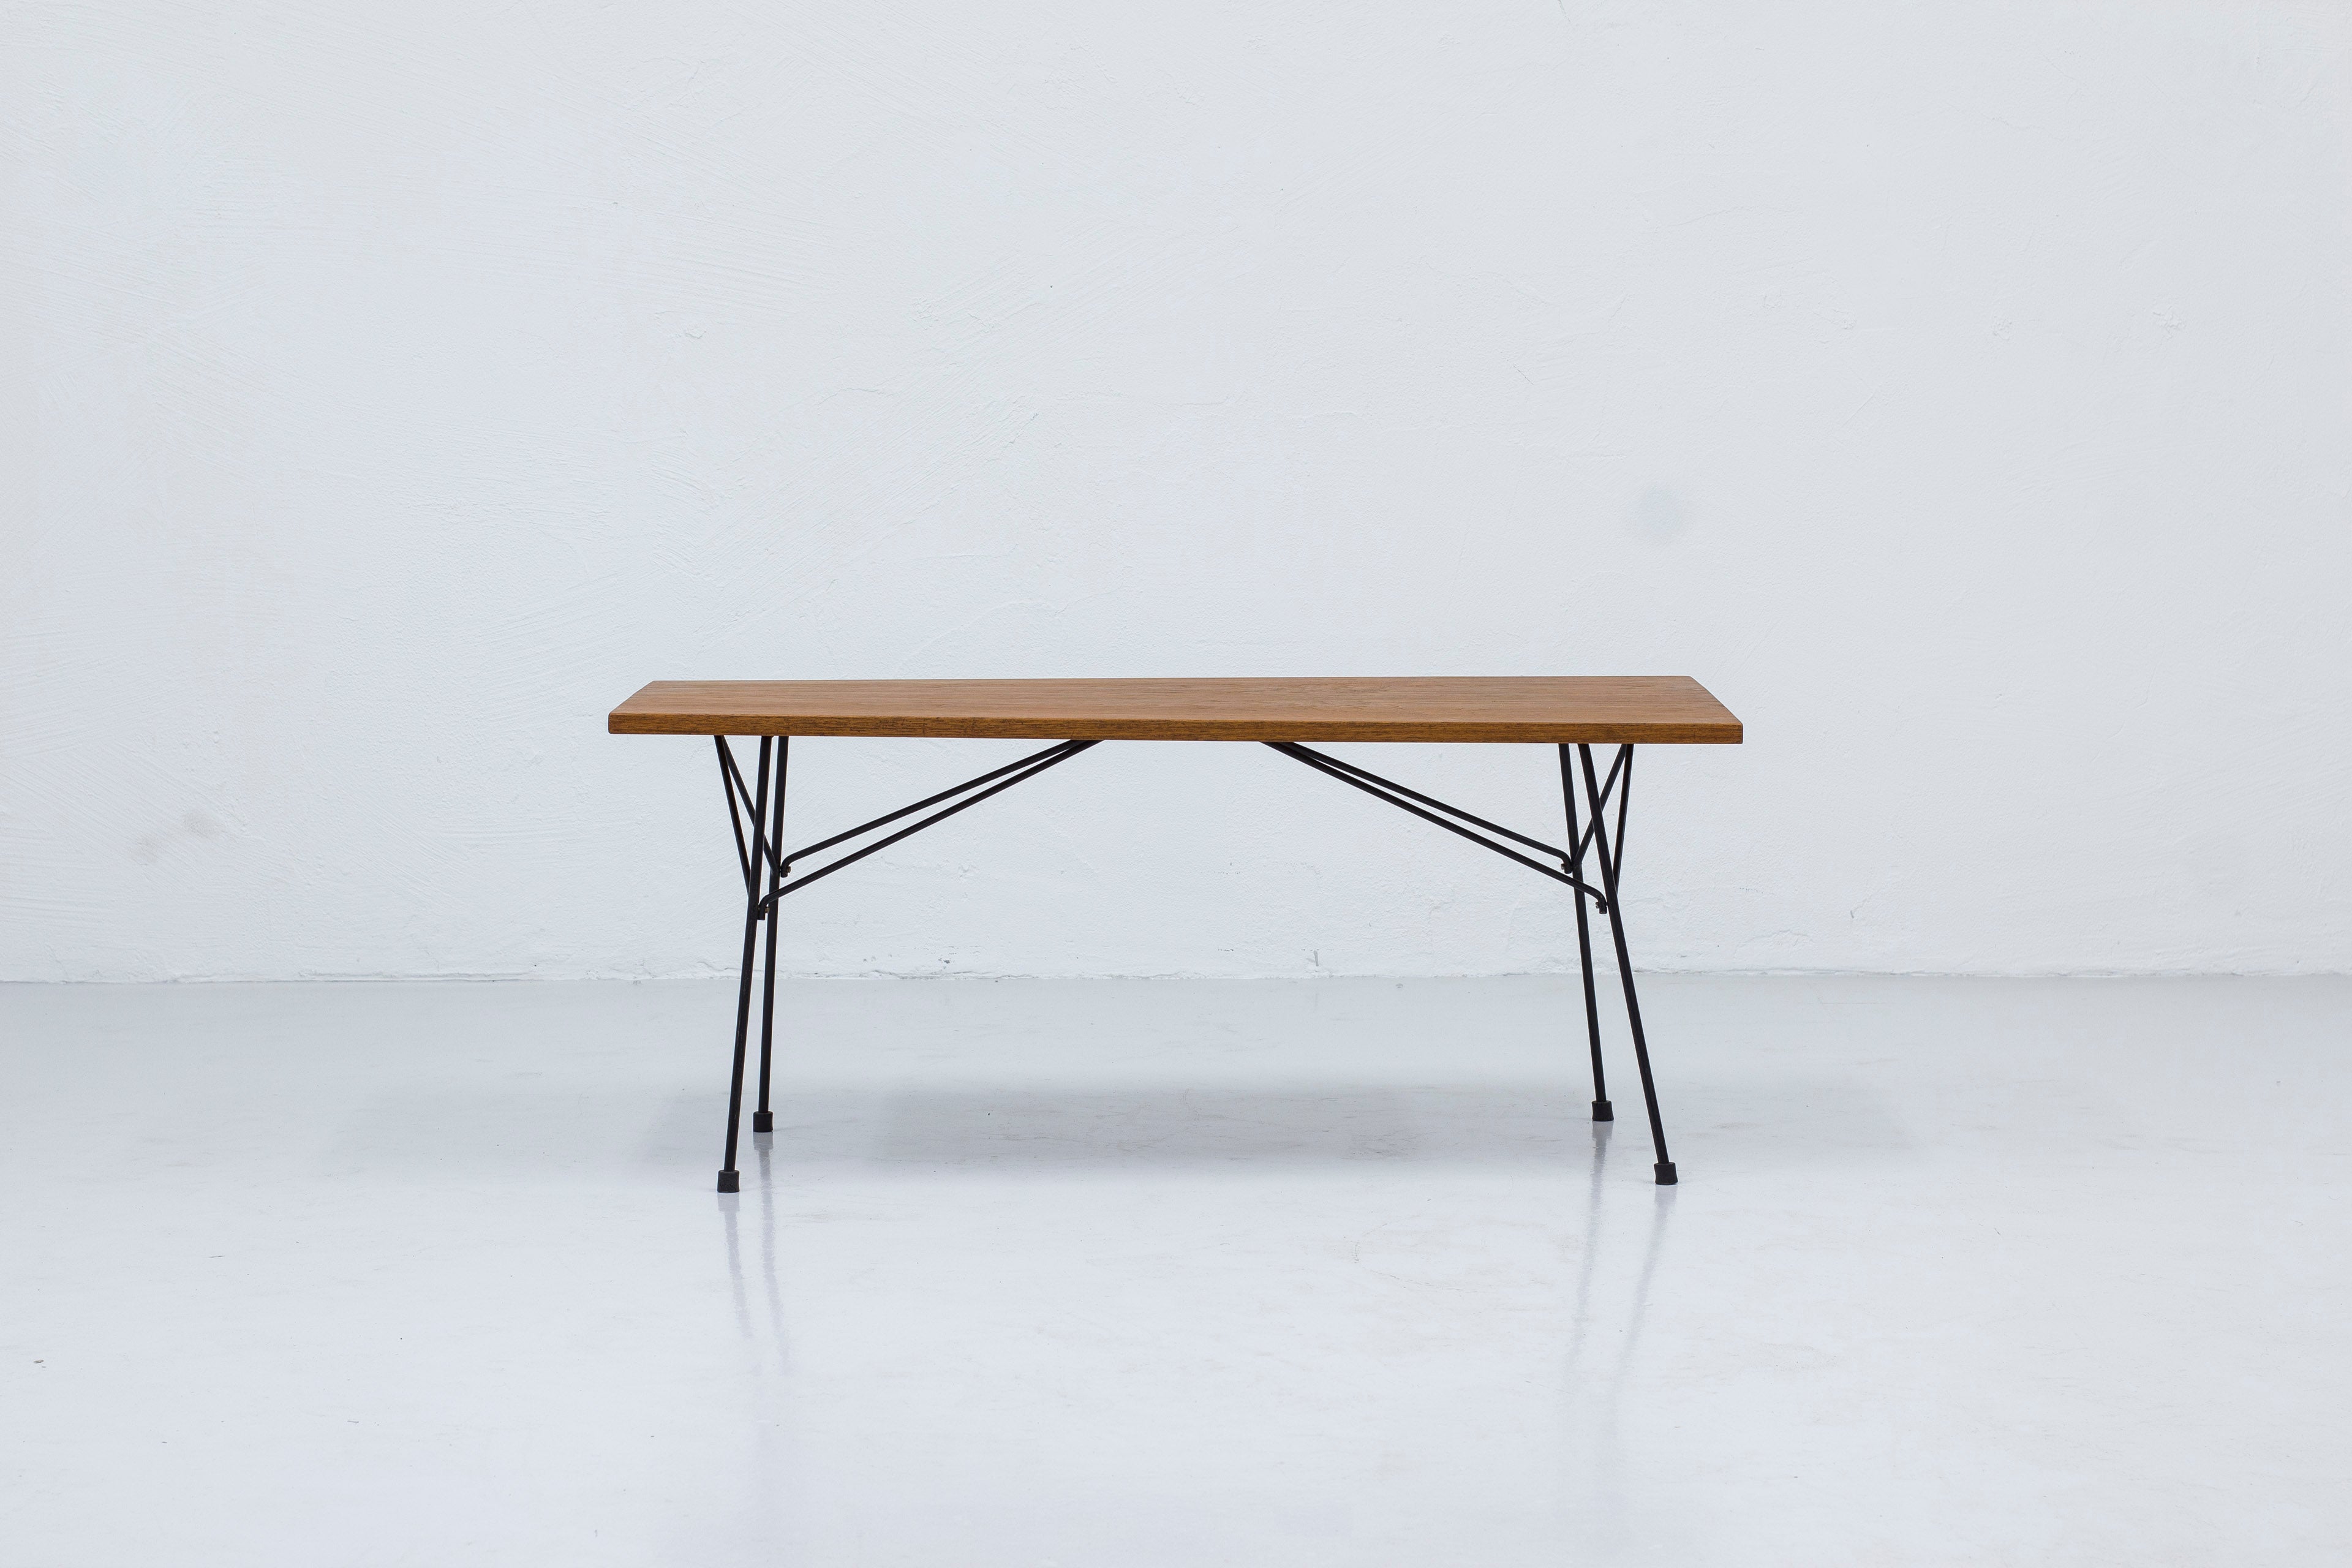 Sofa table by Hans-Agne Jakobsson